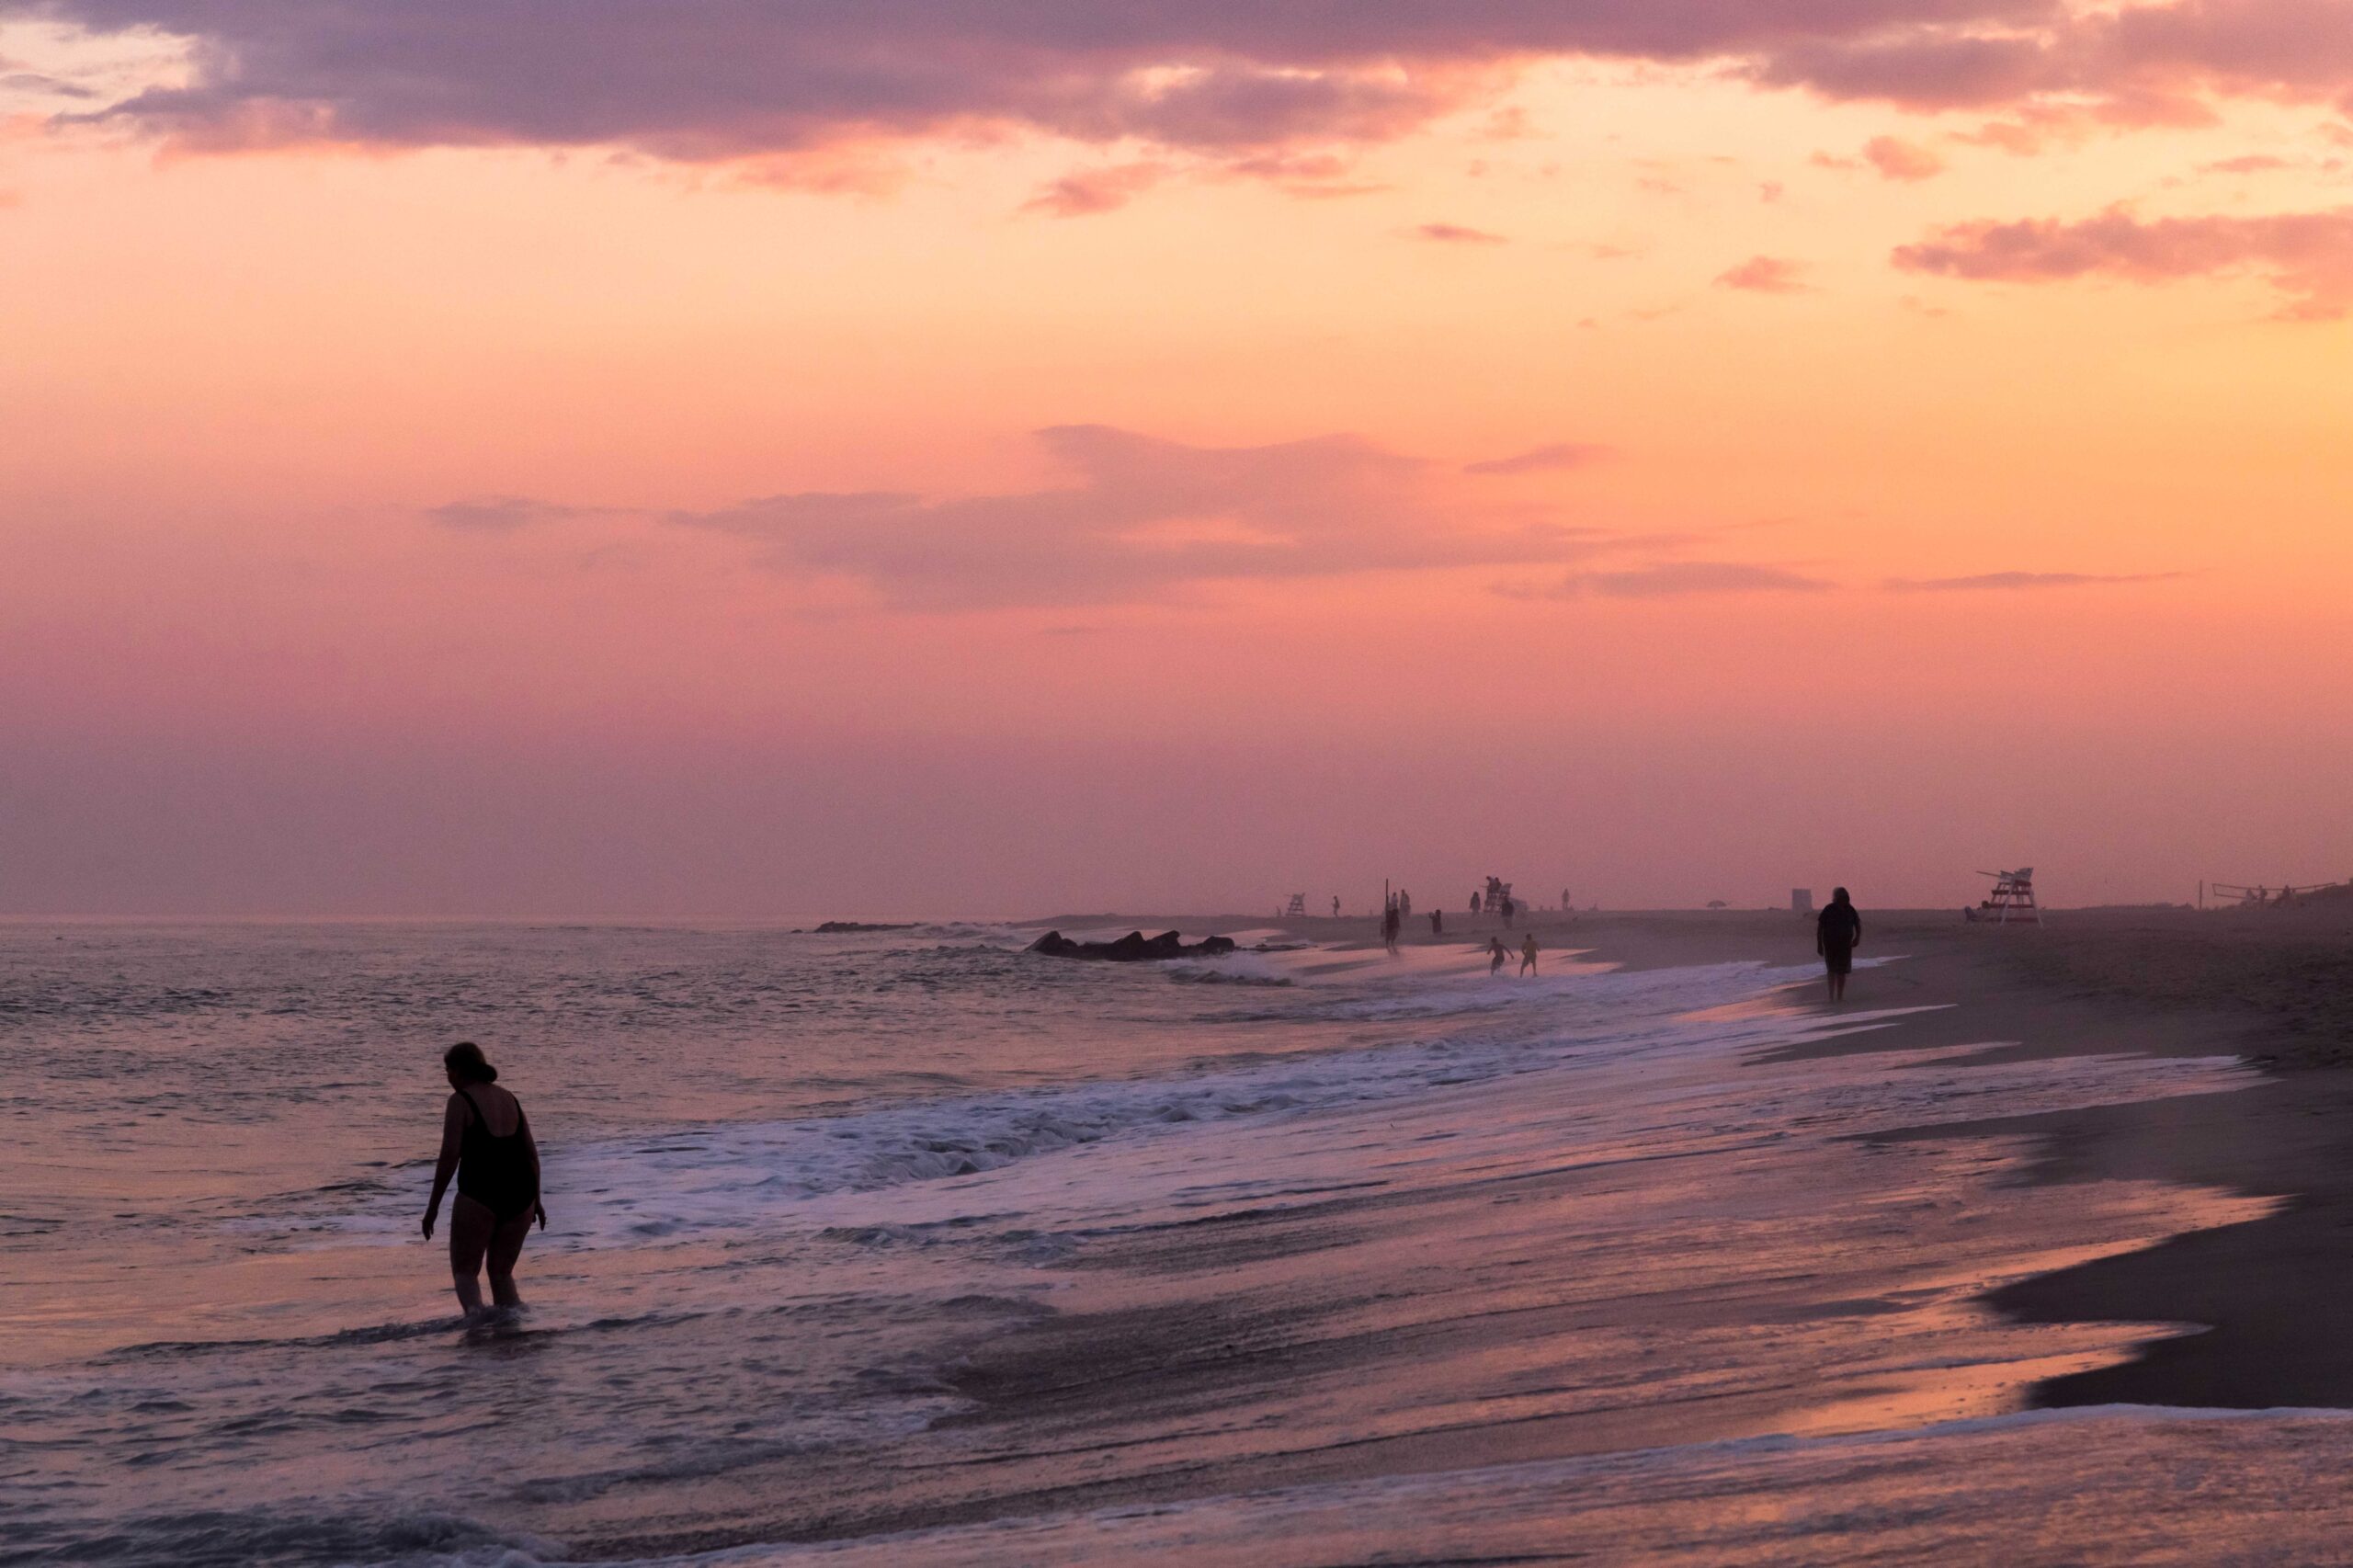 A person walking into the ocean and other people in the distance with a pink sky and some wispy purple and pink clouds